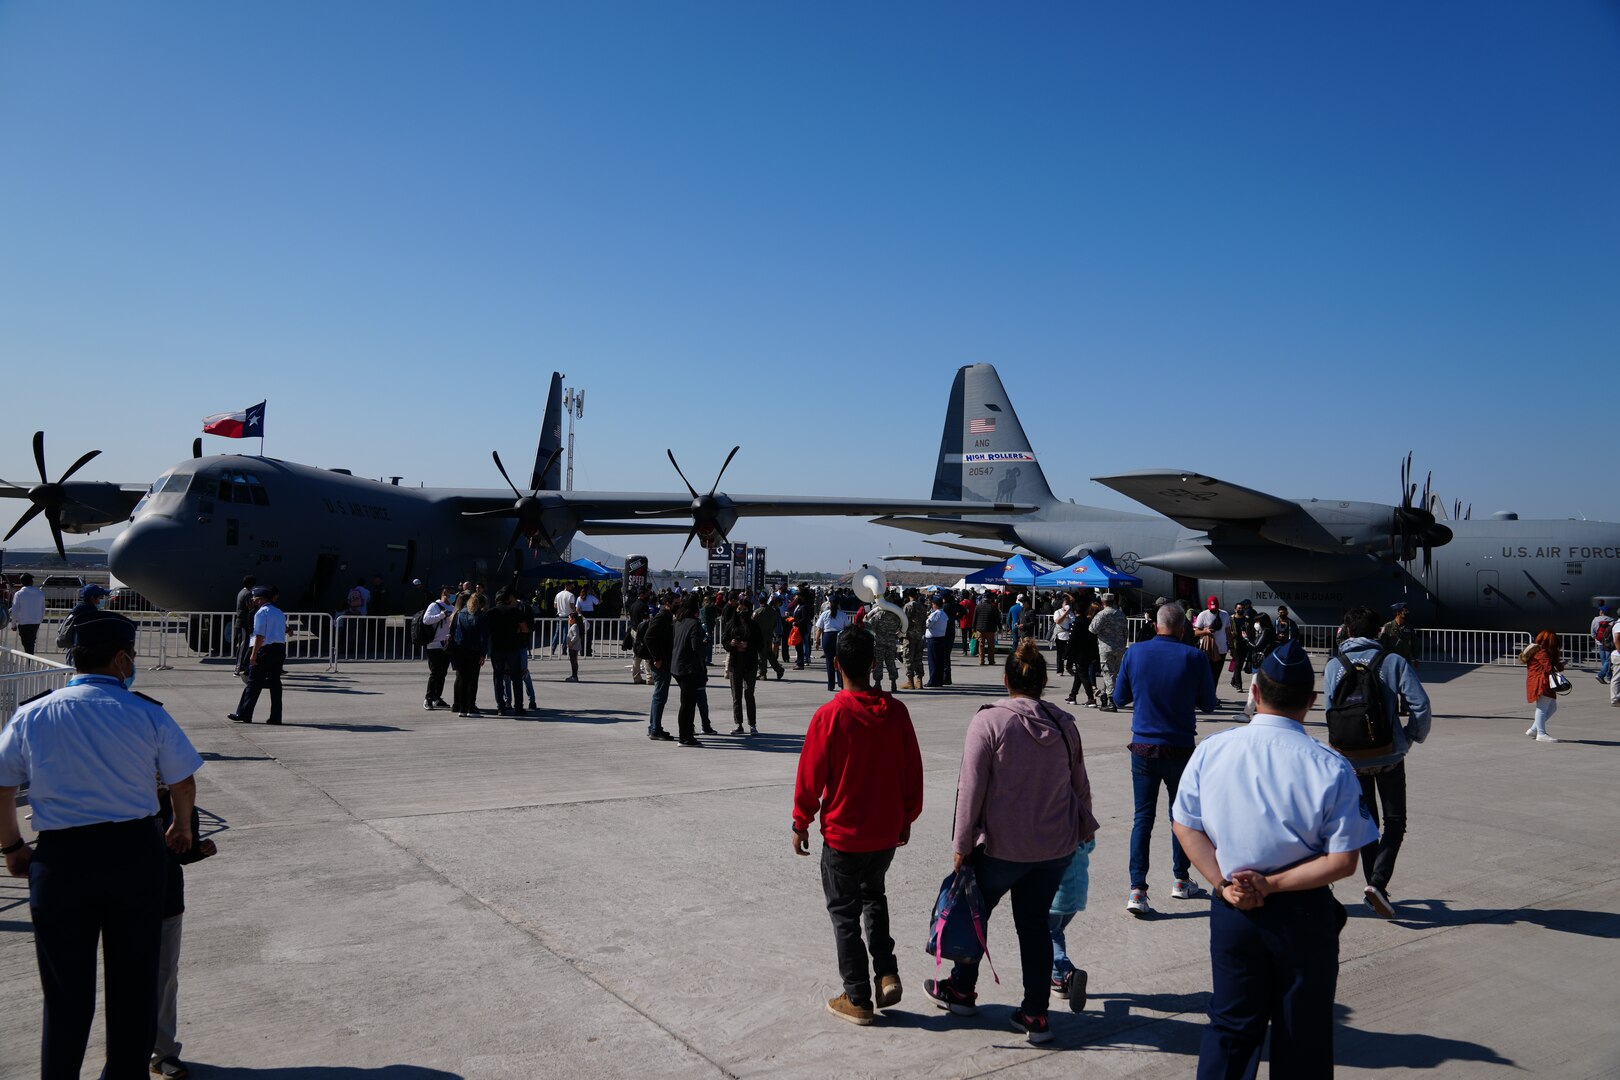 Airshow goers make their way toward the C-130 cargo aircraft from the Texas and Nevada Air National Guard at Feria Internacional del Aire y del Espacio (FIDAE), Latin America’s largest aerospace, defense and security exhibition, in Santiago, Chile, April 8, 2022.